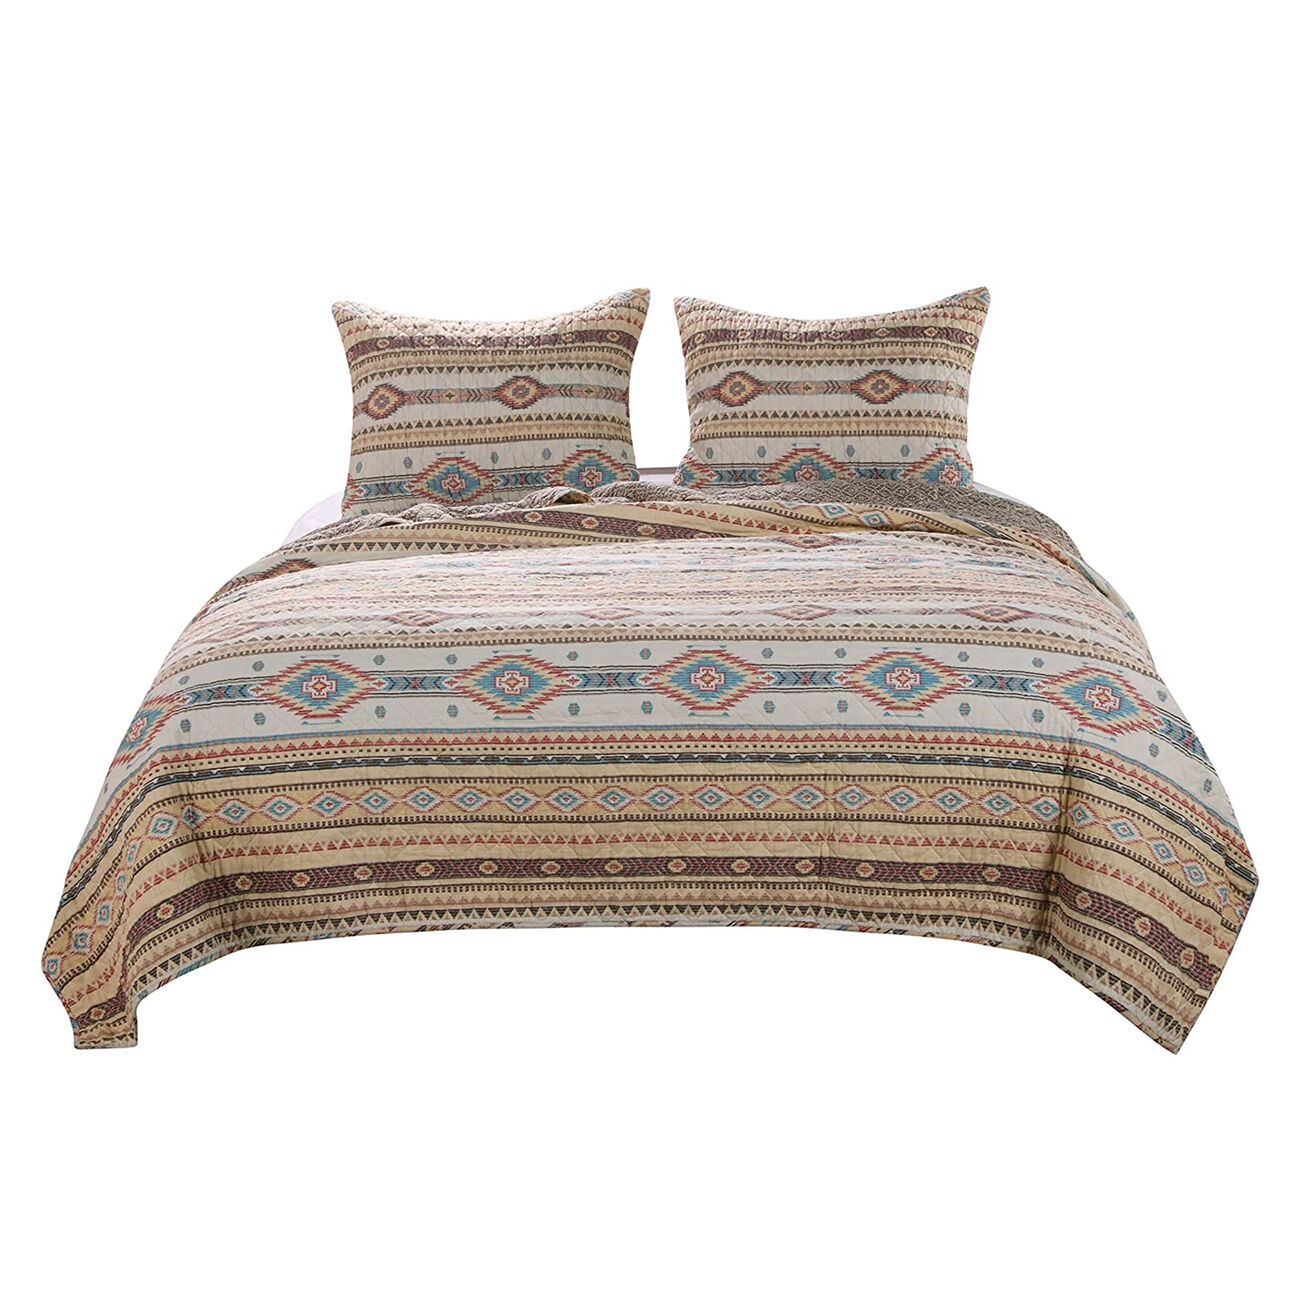 Twin Size 2 Piece Polyester Quilt Set with Kilim Pattern, Multicolor